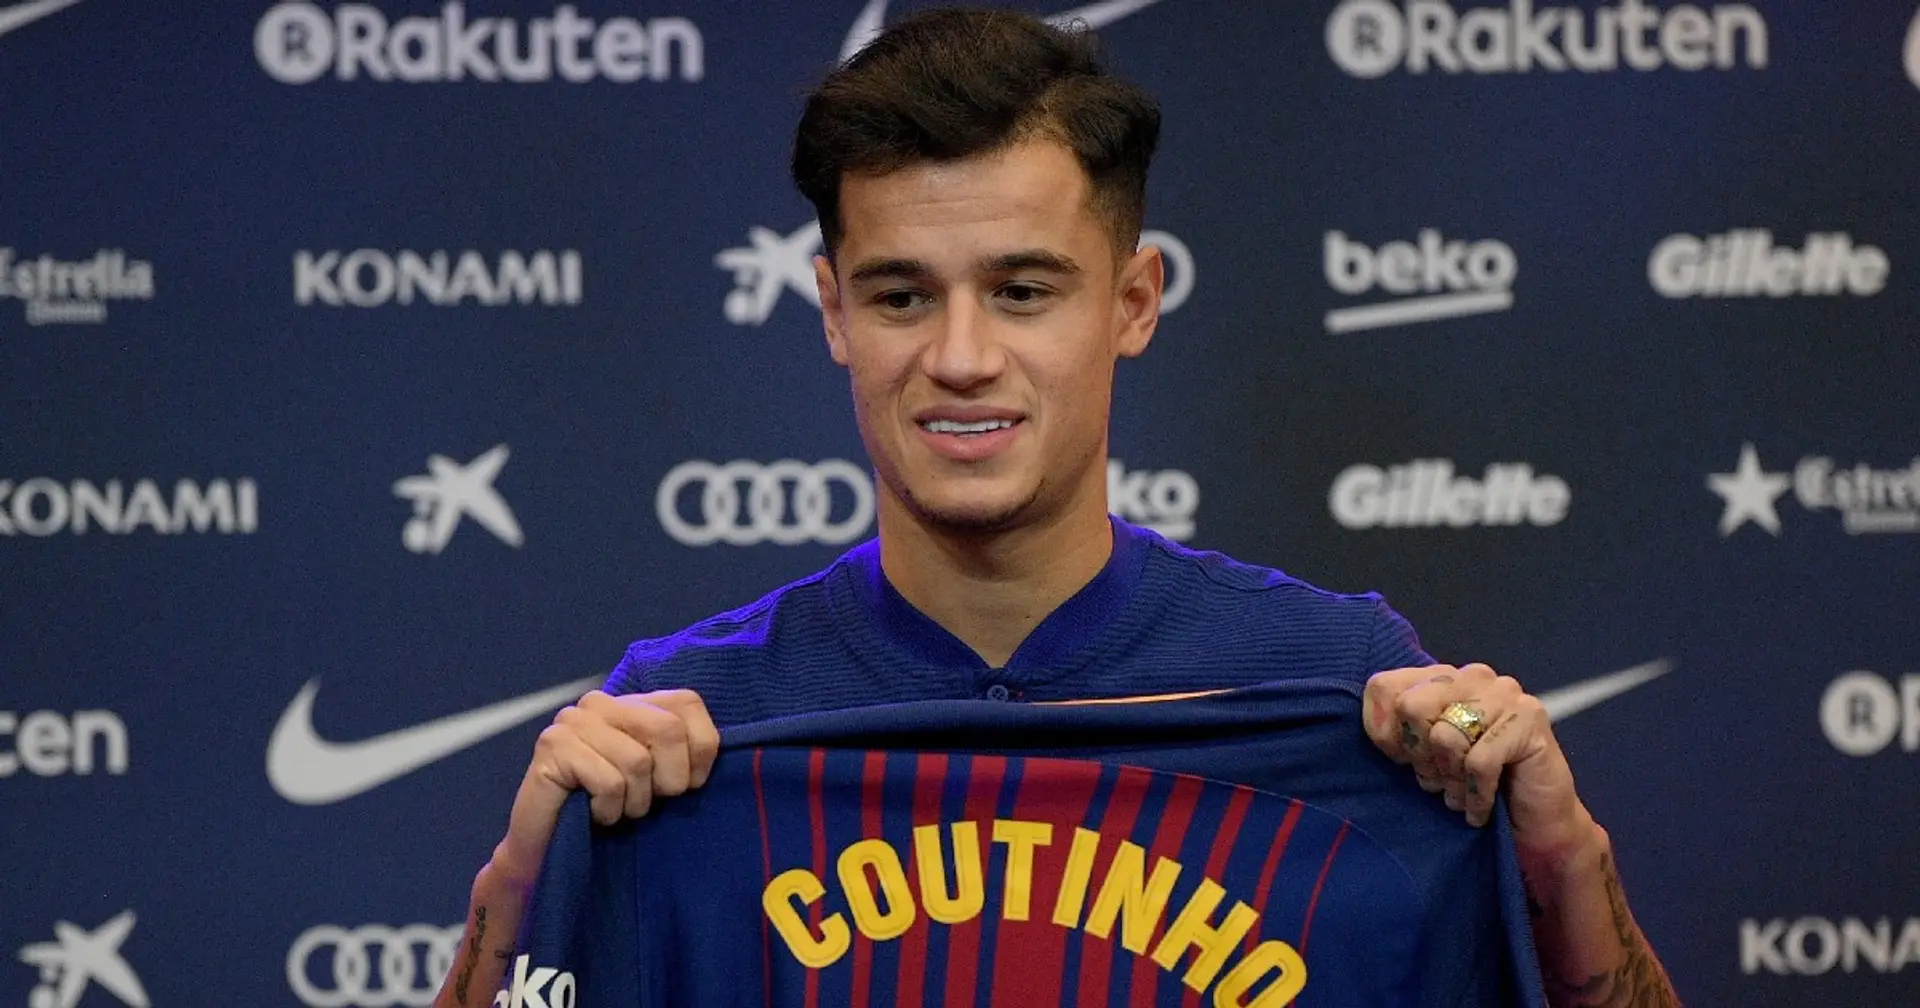 'I tried everything': Philippe Coutinho says he doesn't regret leaving Liverpool for Barcelona